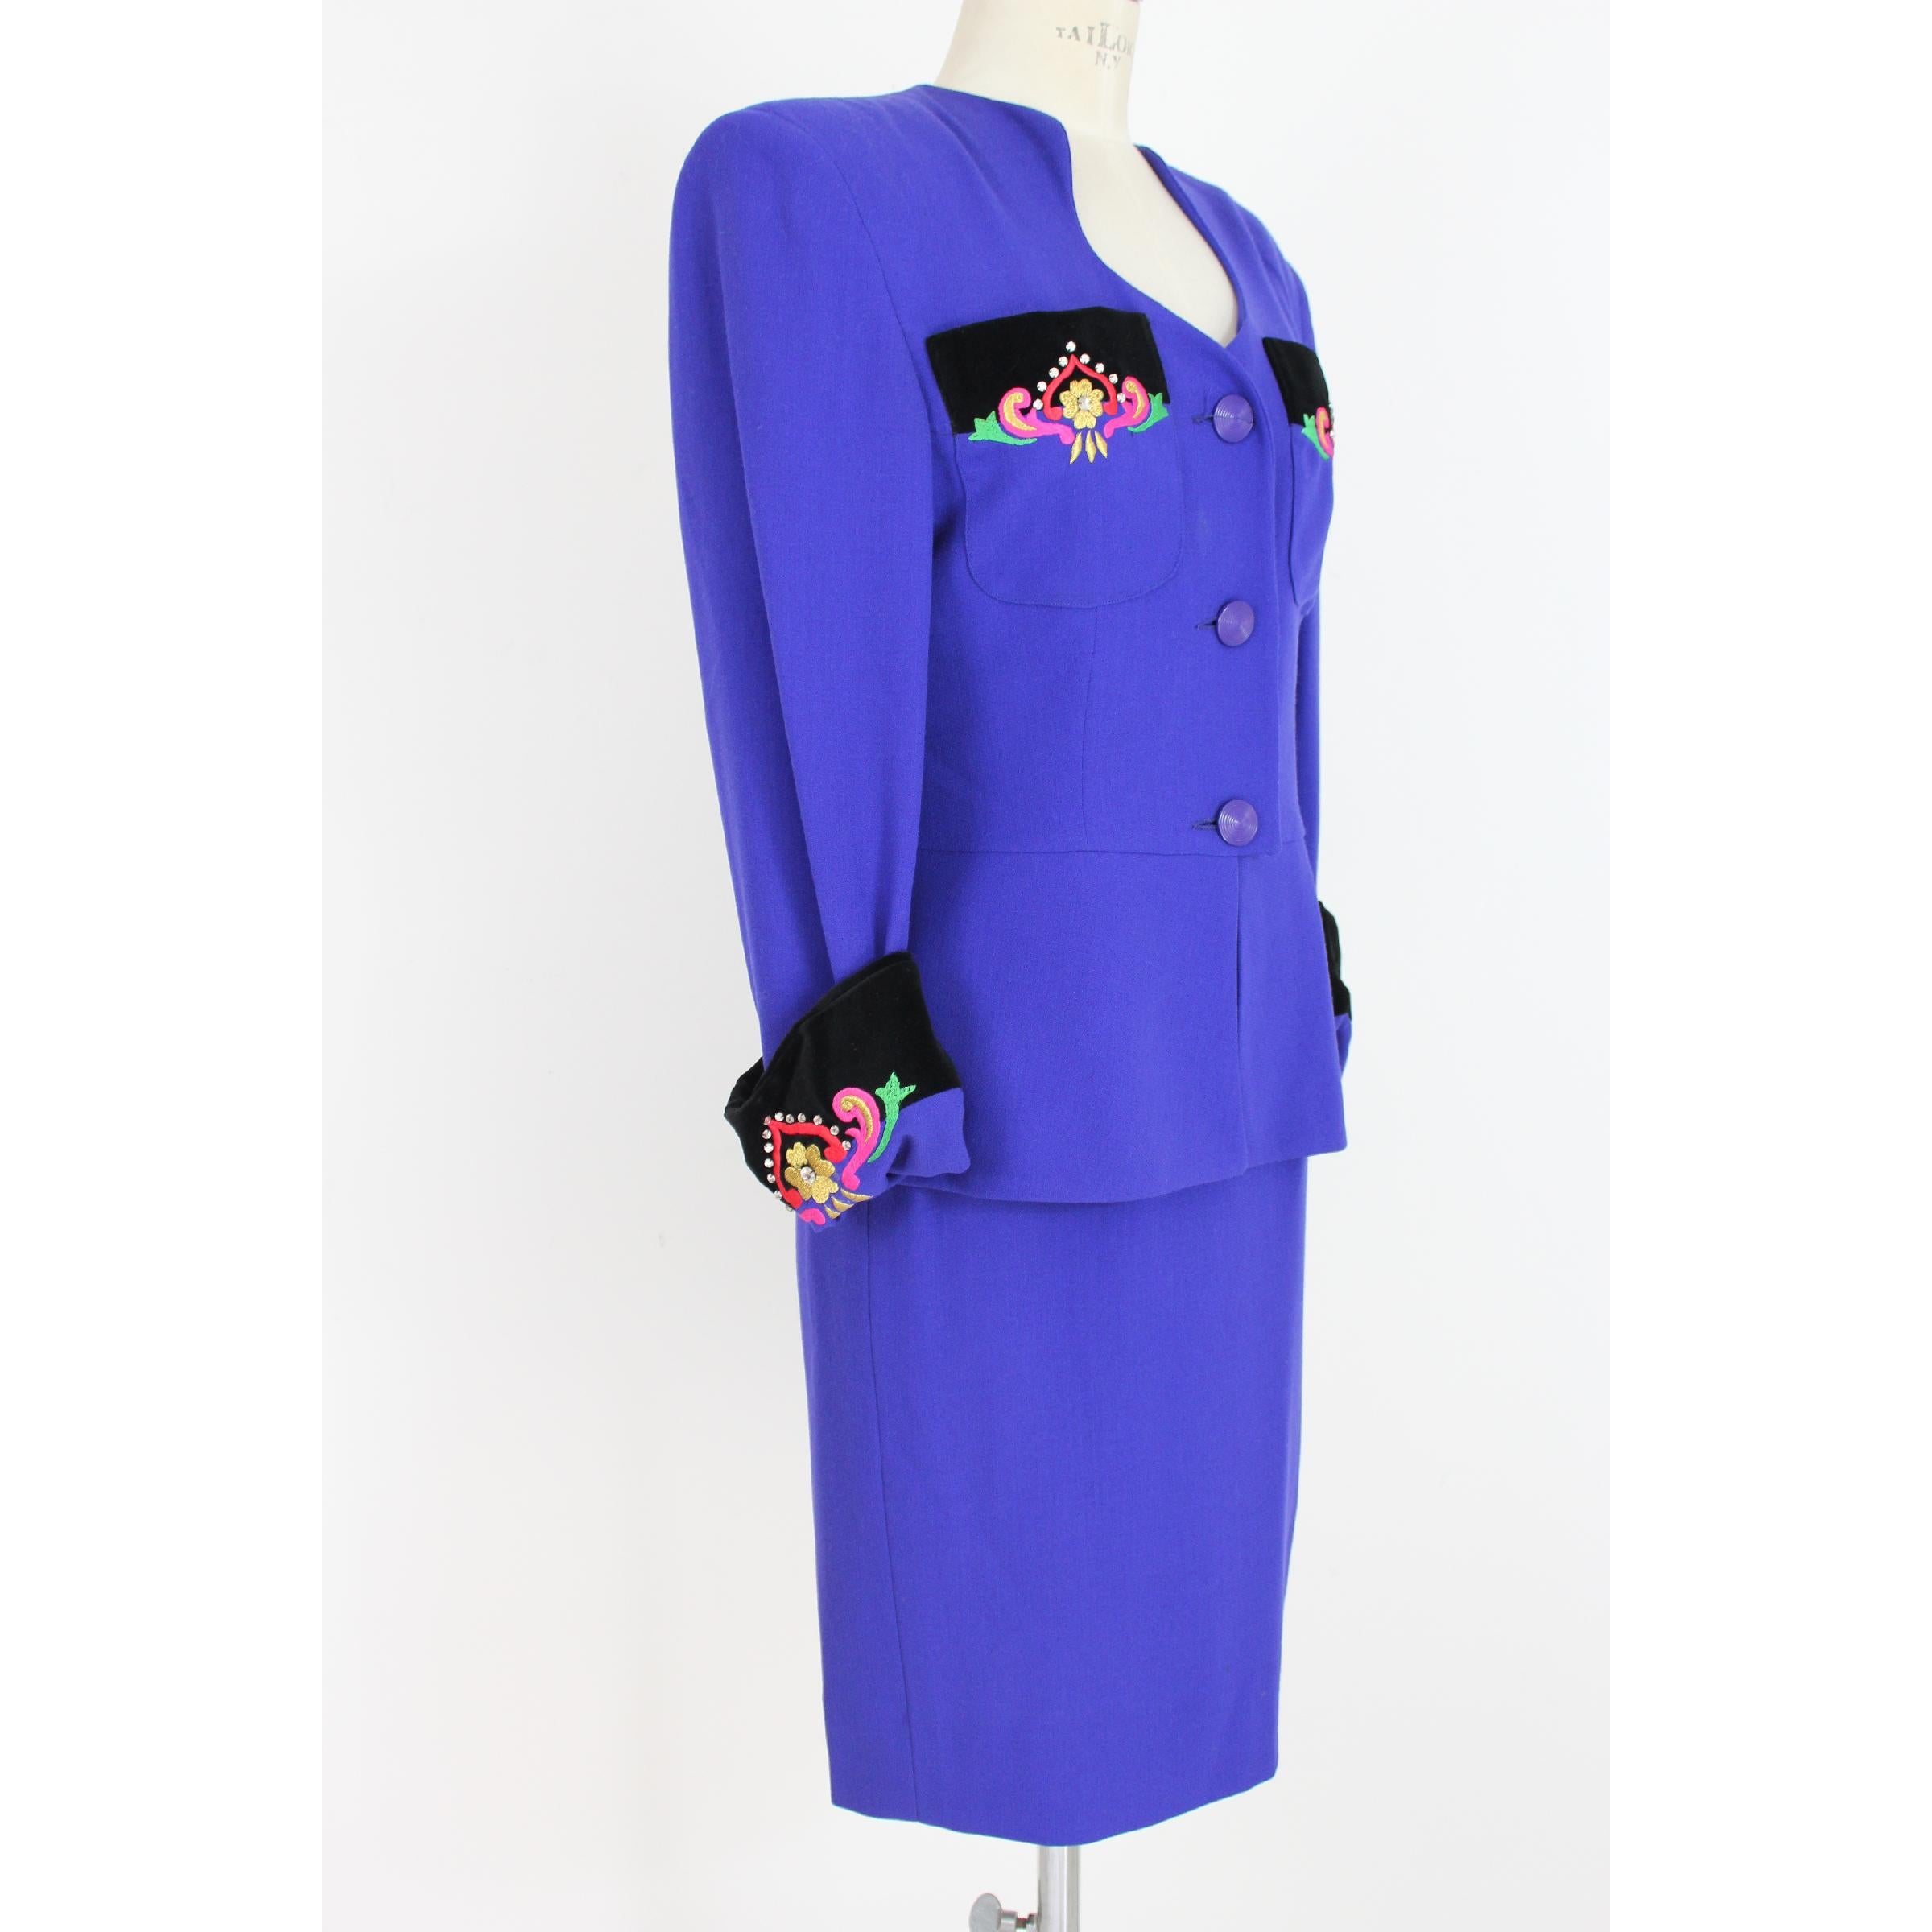 Leonia Polvan 80's vintage women's evening skirt suit. Wool jacket and skirt, blue with floral and rhinestone designs, velvet details. Made in Italy. Excellent vintage condition. 

Size: 44 It 10 Us 12 Uk 

Shoulder: 44 cm 
Bust / Chest: 48 cm